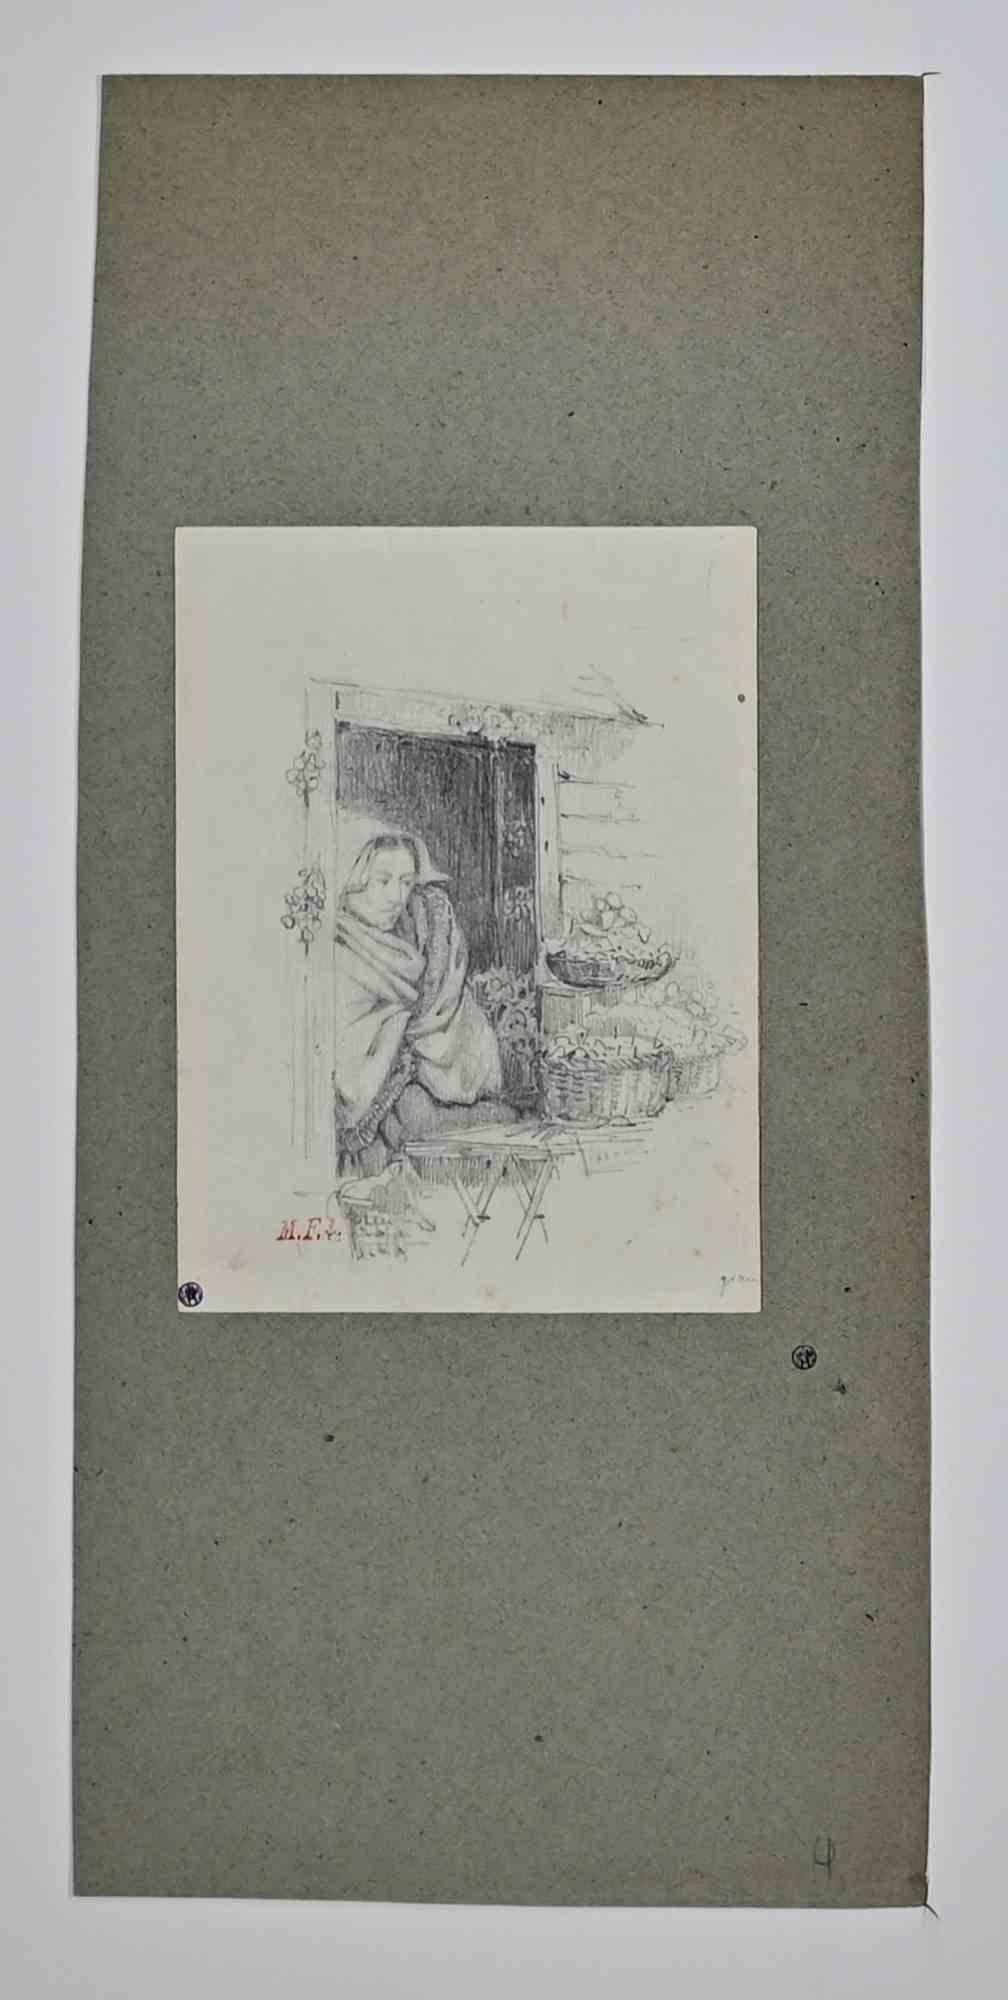 Lady by the Window is a drawing in pencil on creamy colored paper, realized by French painter Léon Morel-Fatio (1810-1871) in the 19th Century.

Monogrammed in red on the lower.

Applied on cardboard and included a greyish Passepartout.

Good